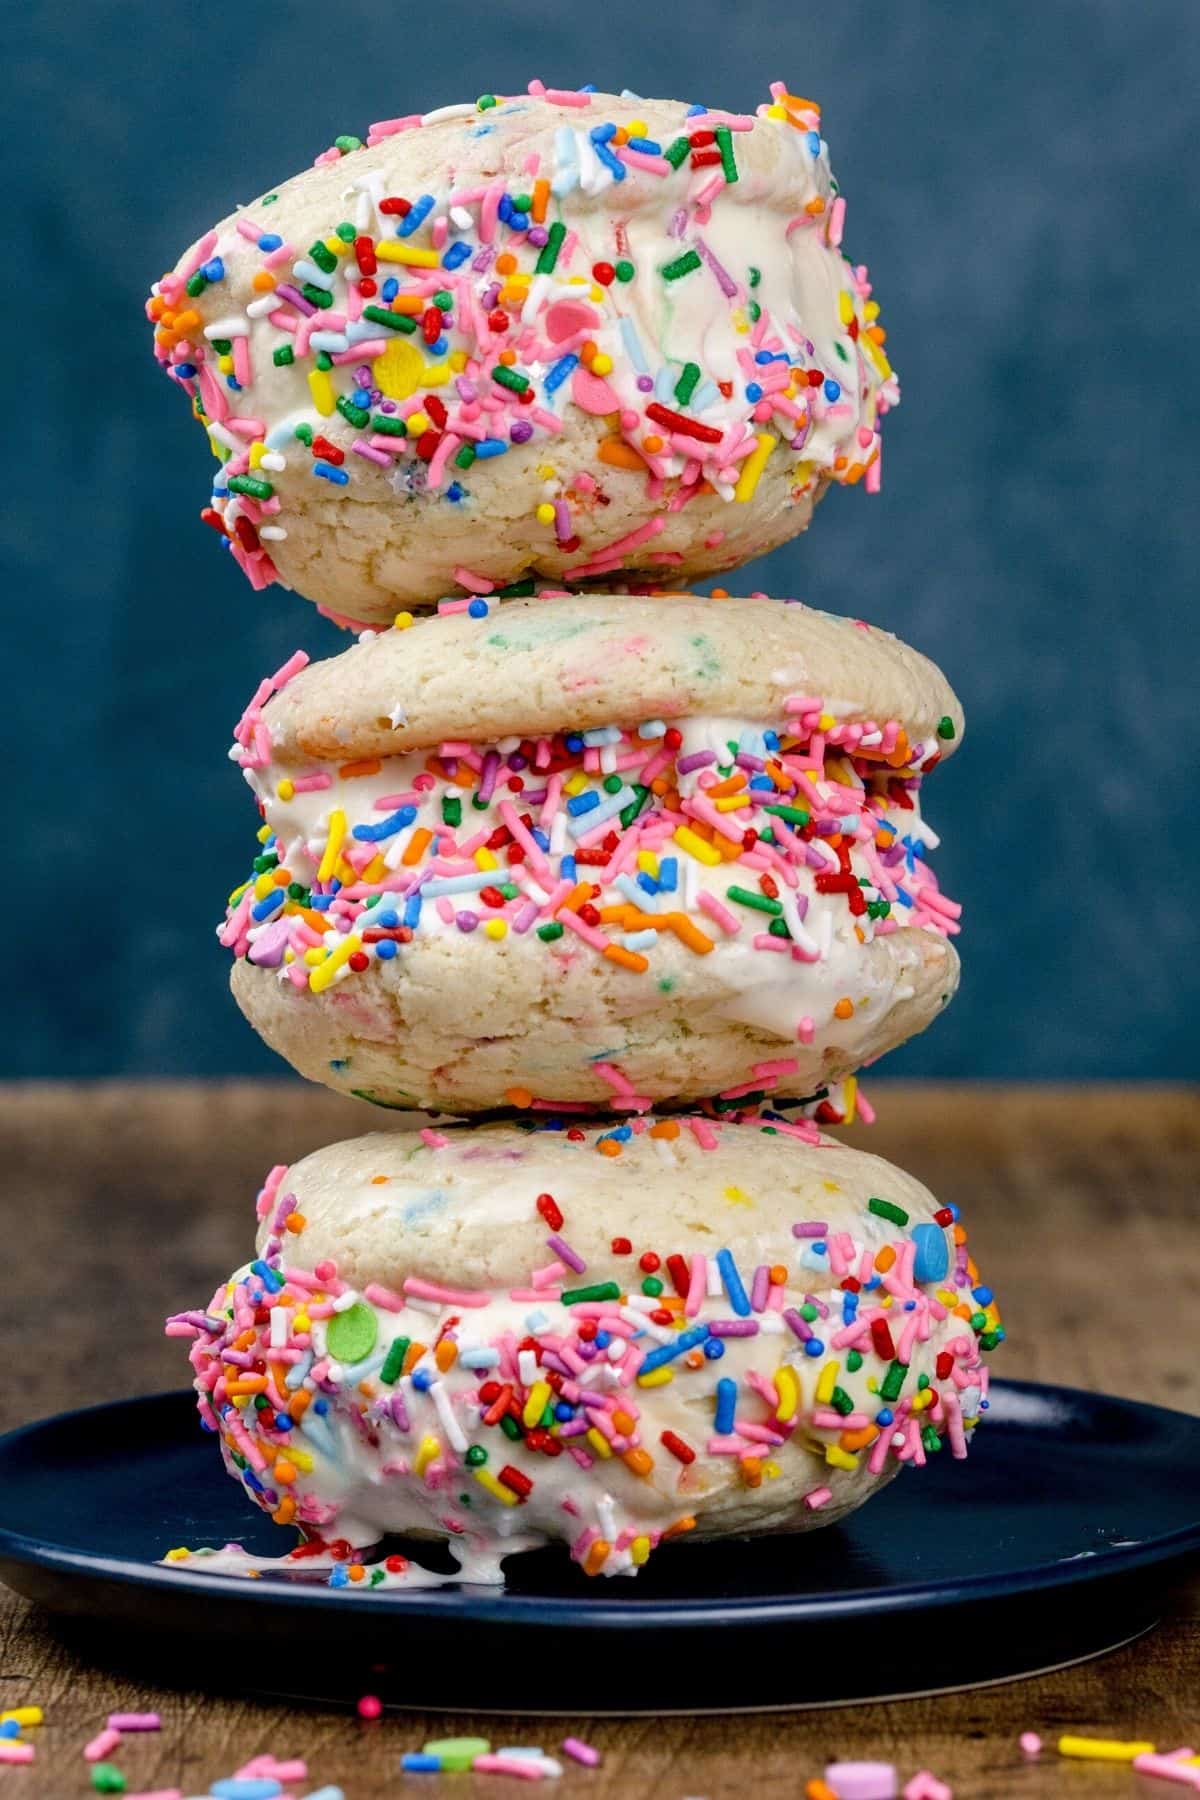 a stack of 3 rainbow sprinkled gluten free ice cream sandwiches on a dark blue plate in front of a dark blue background